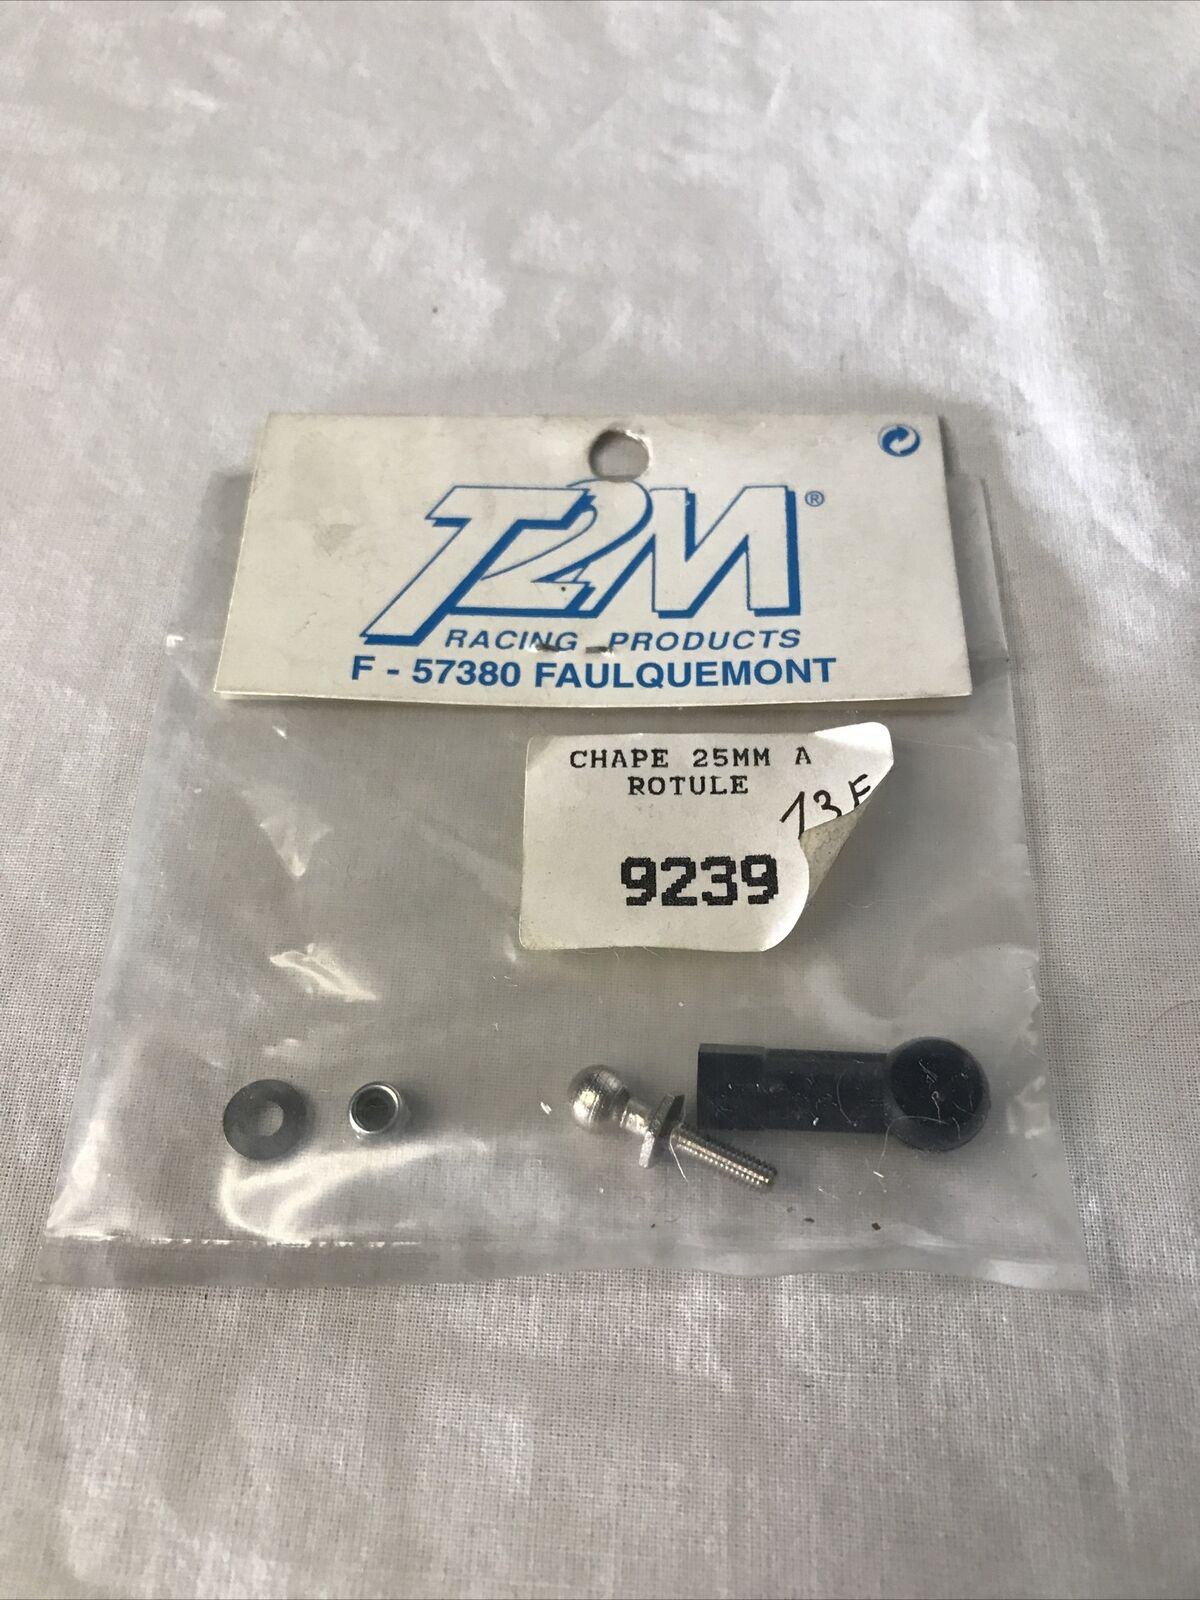 T2m racing products 9239 25mm clevis has patella-spare part model rc